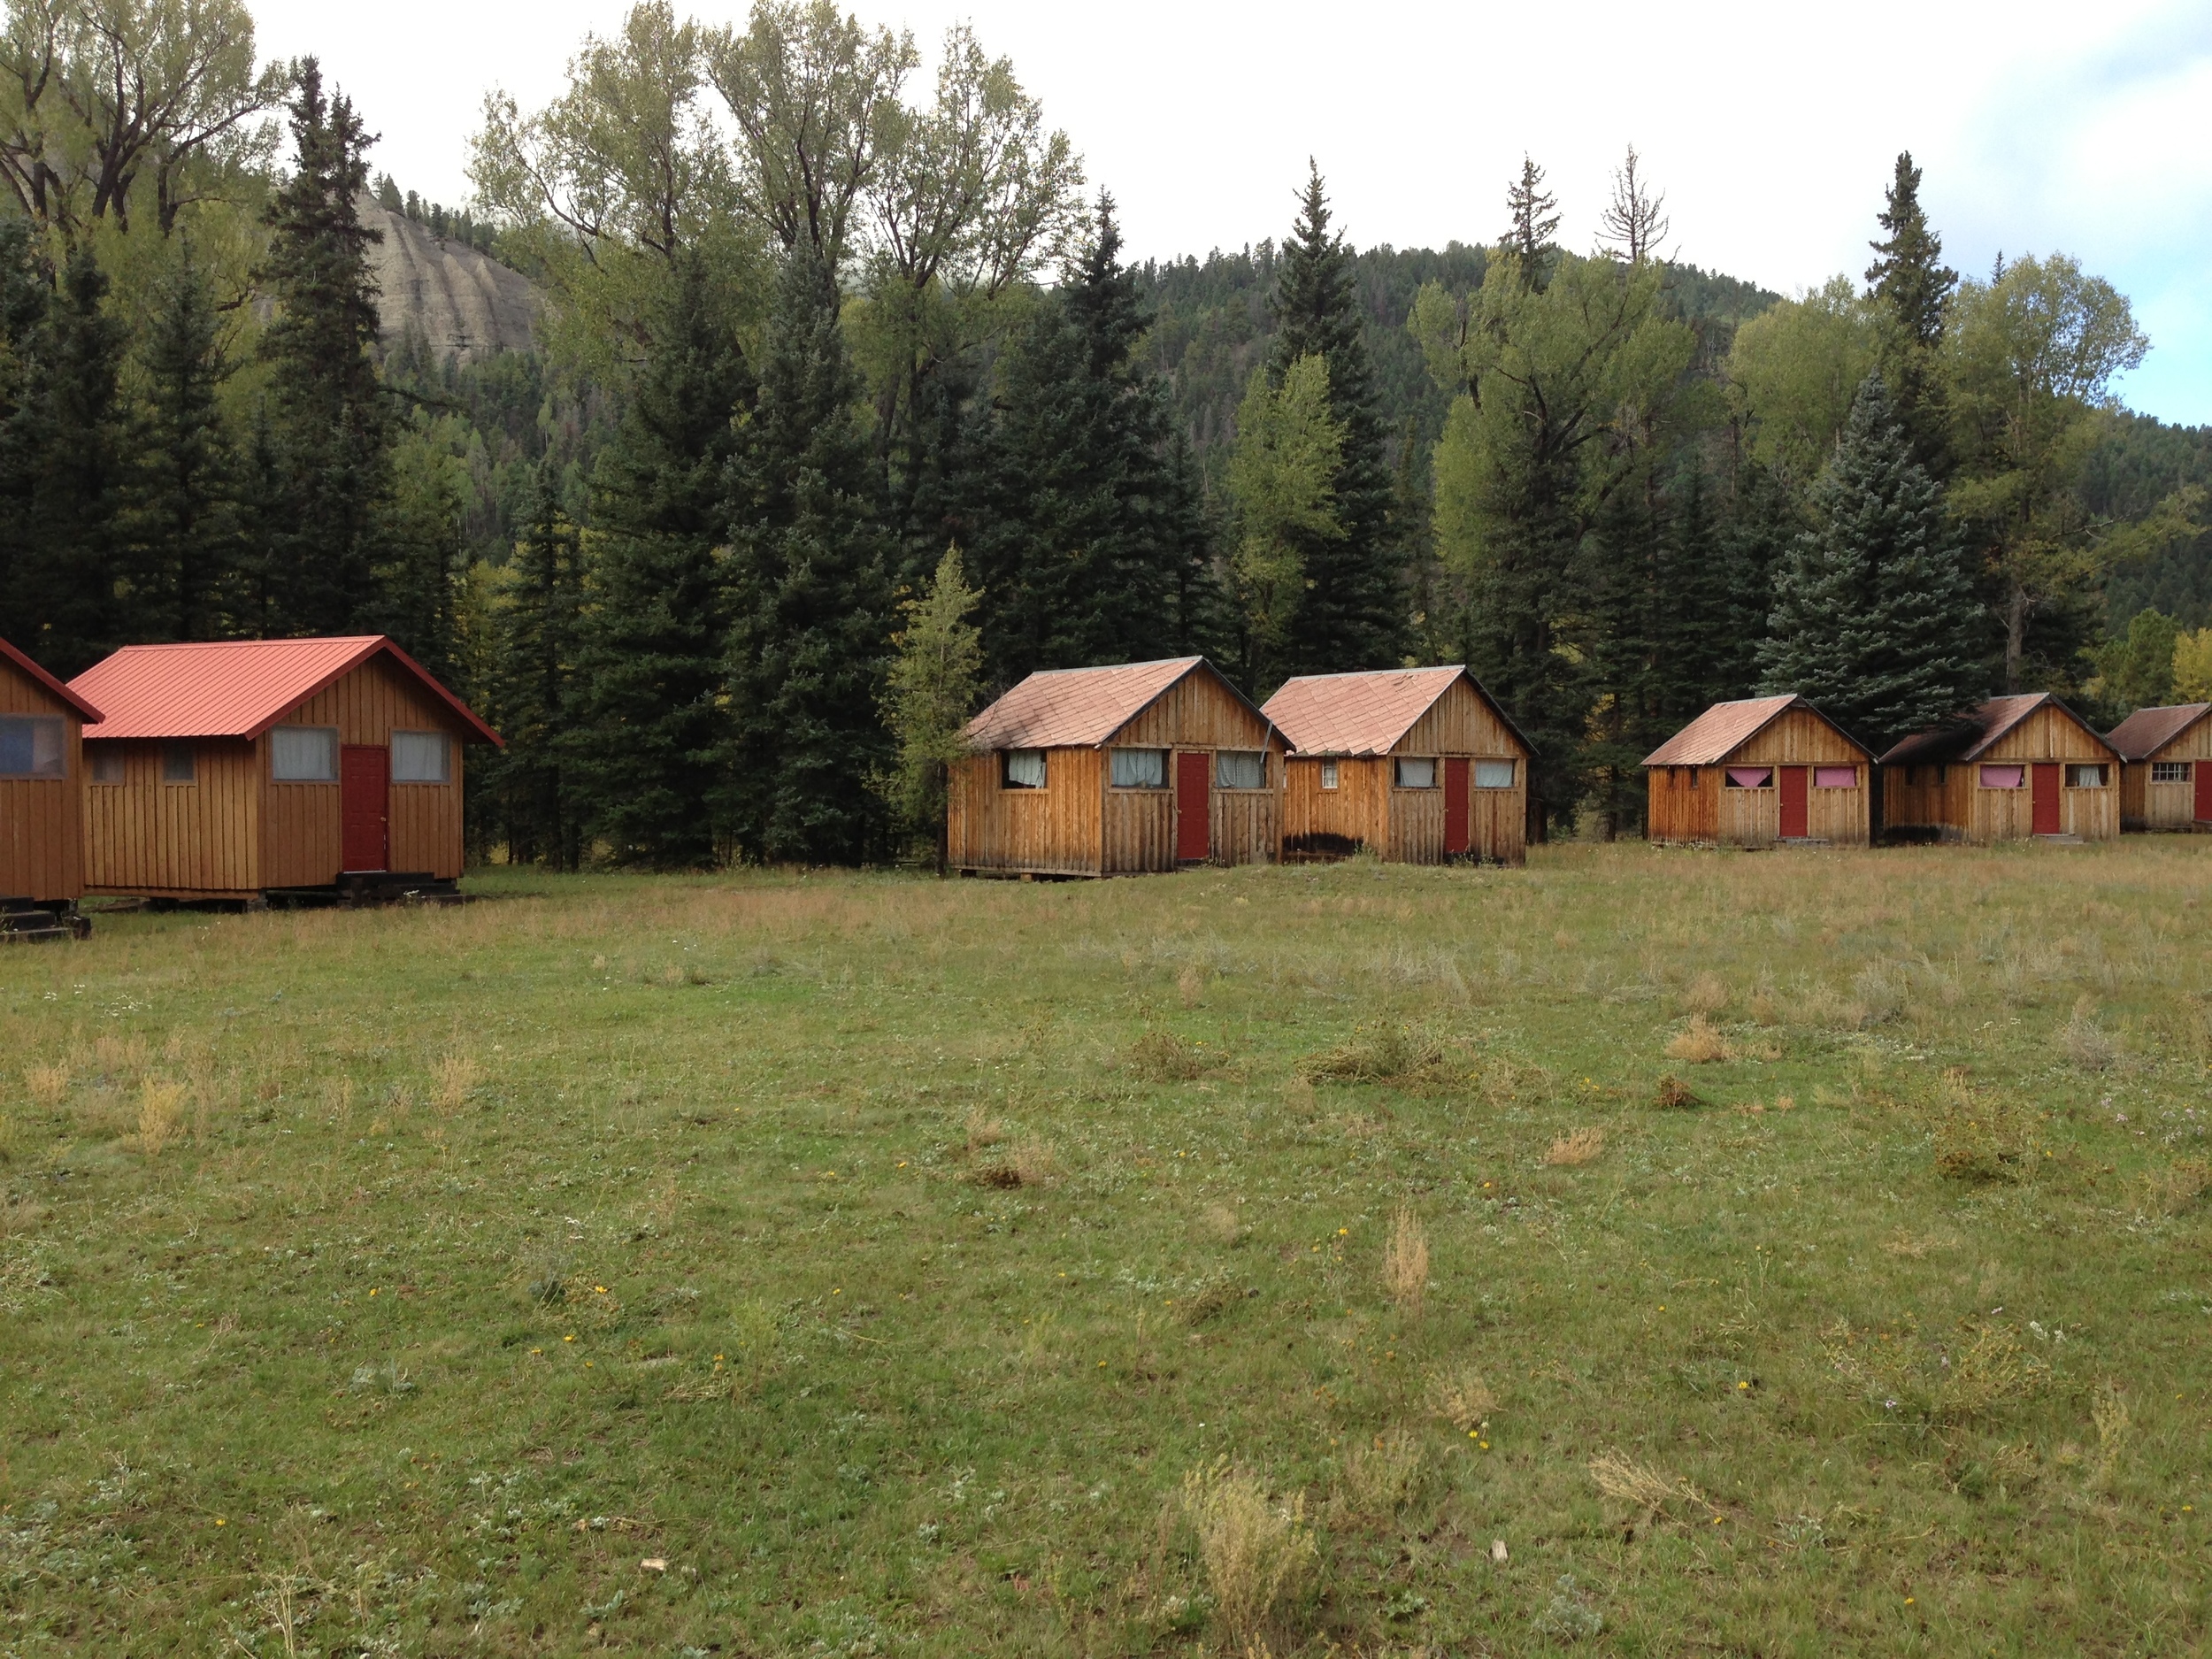 Cabins (1 on left remodeled, on right before remodeling)